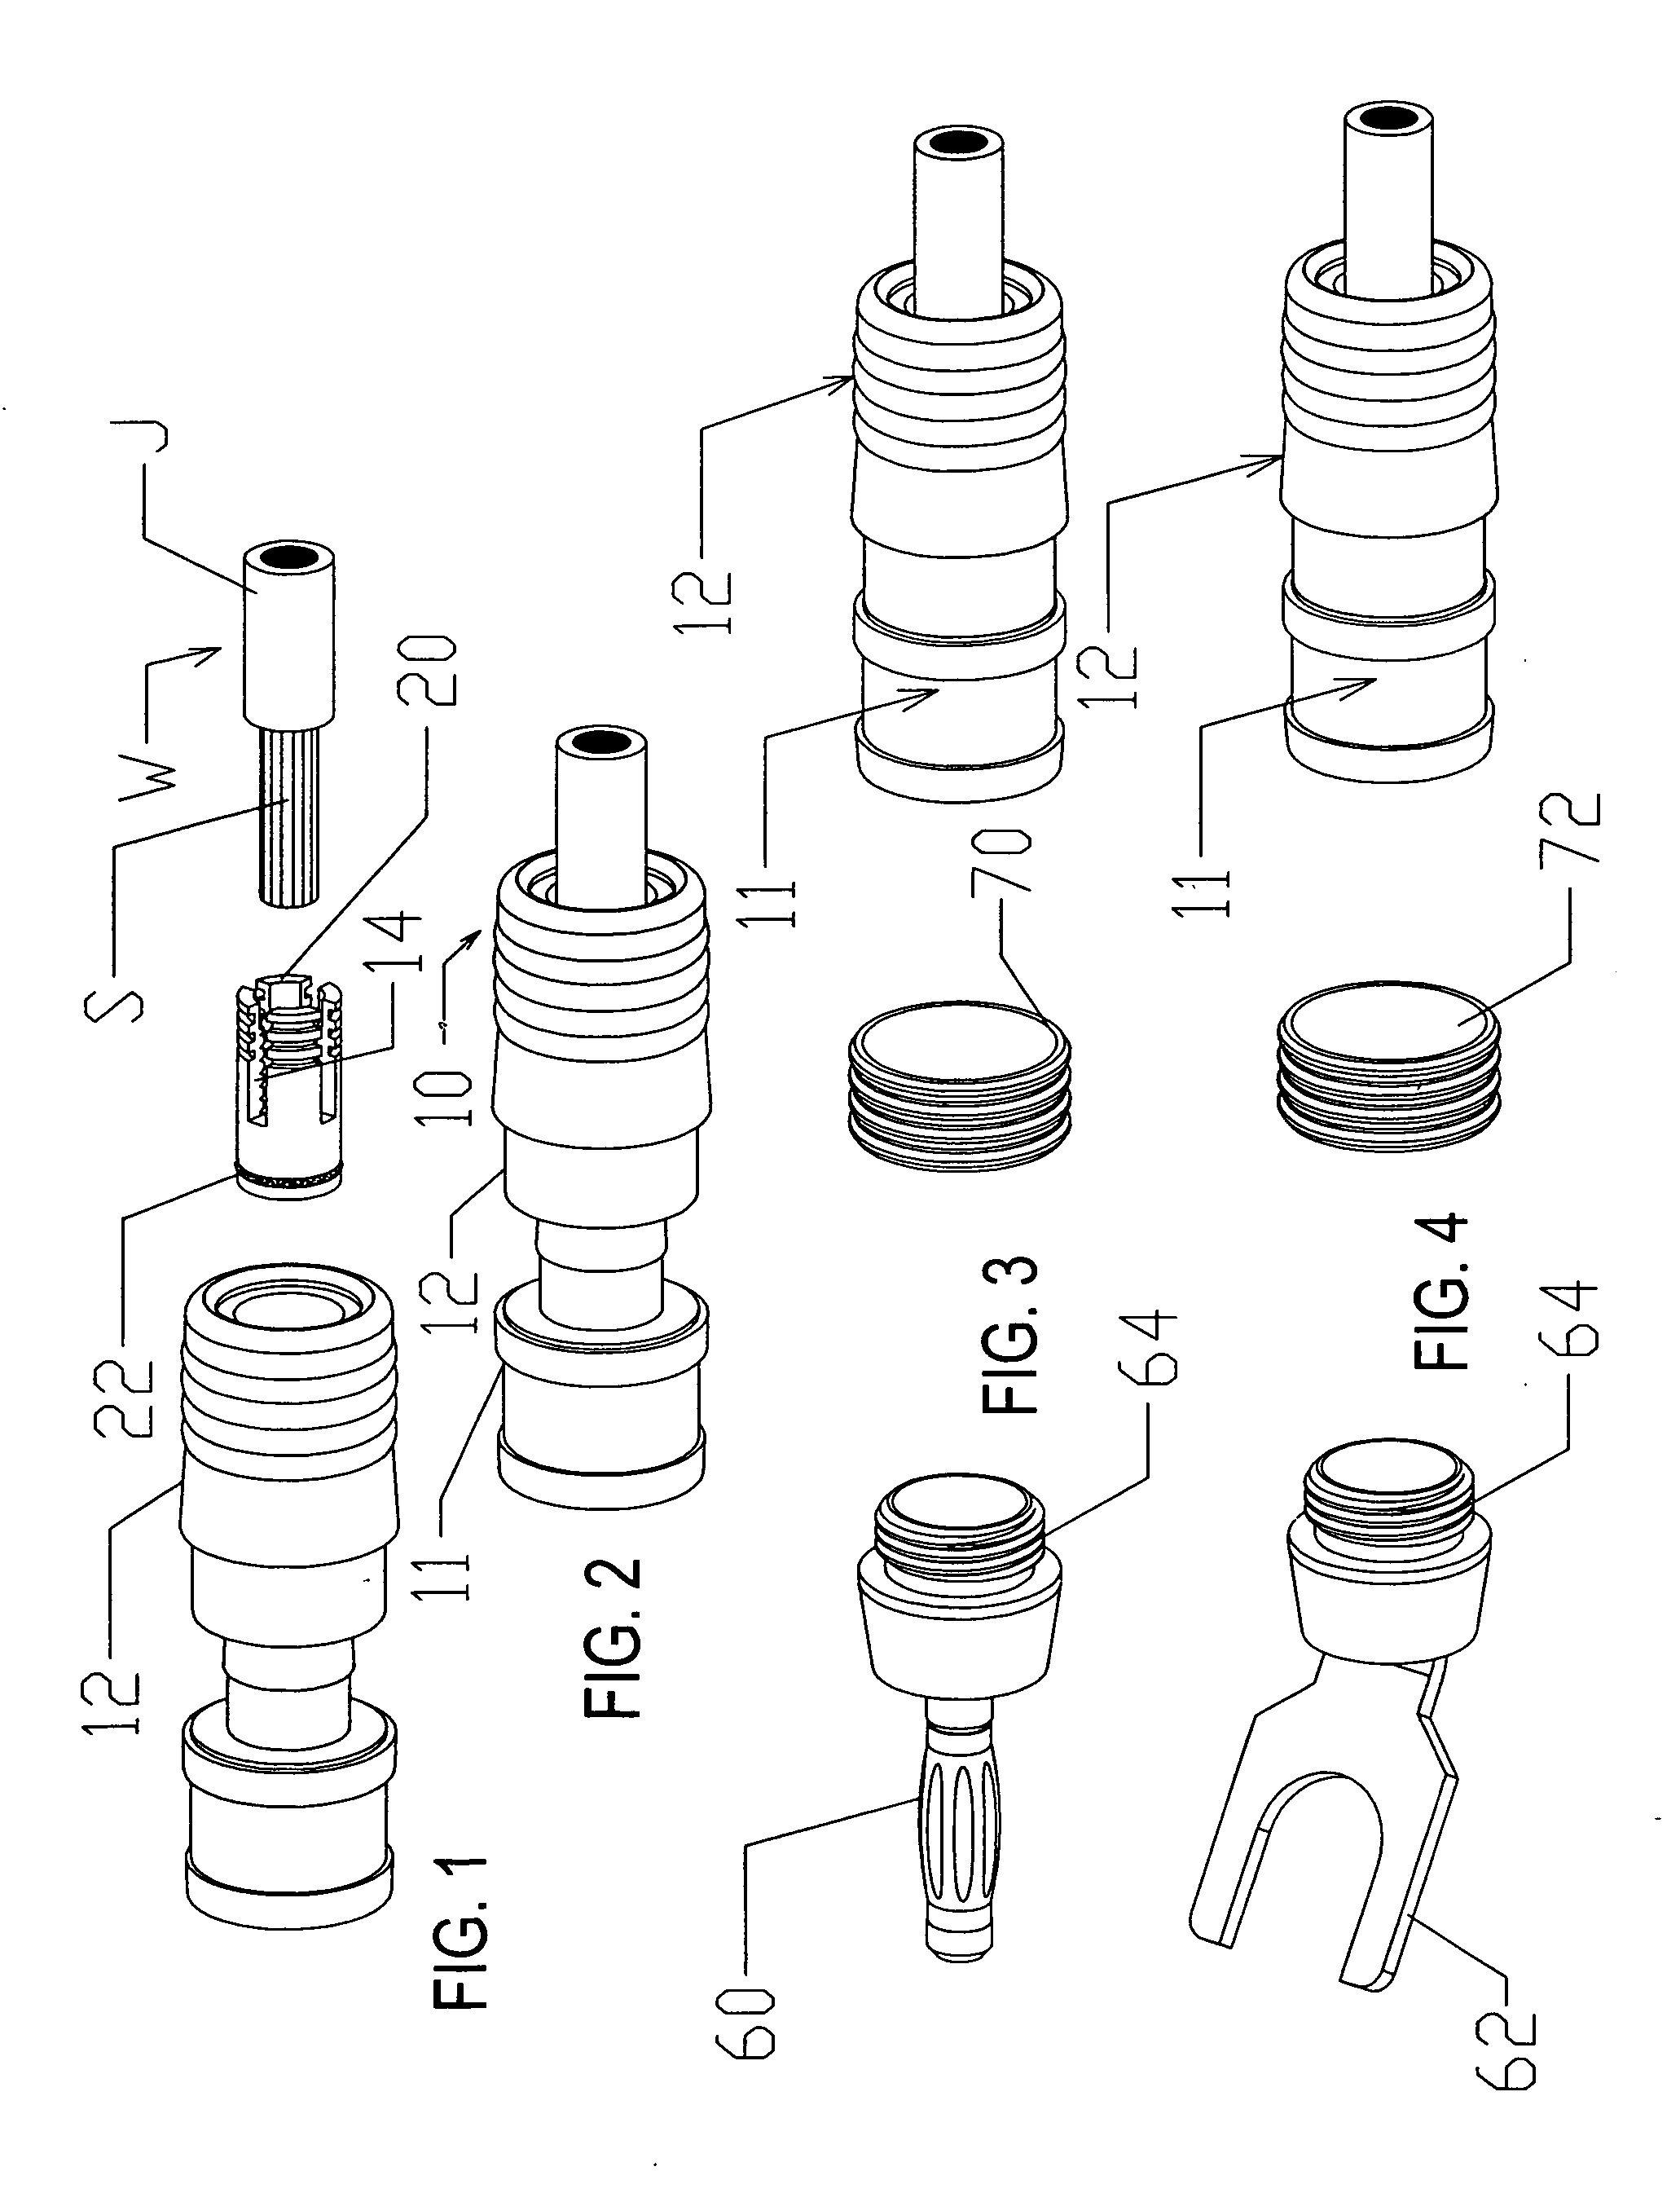 Crimpable wire connector assembly